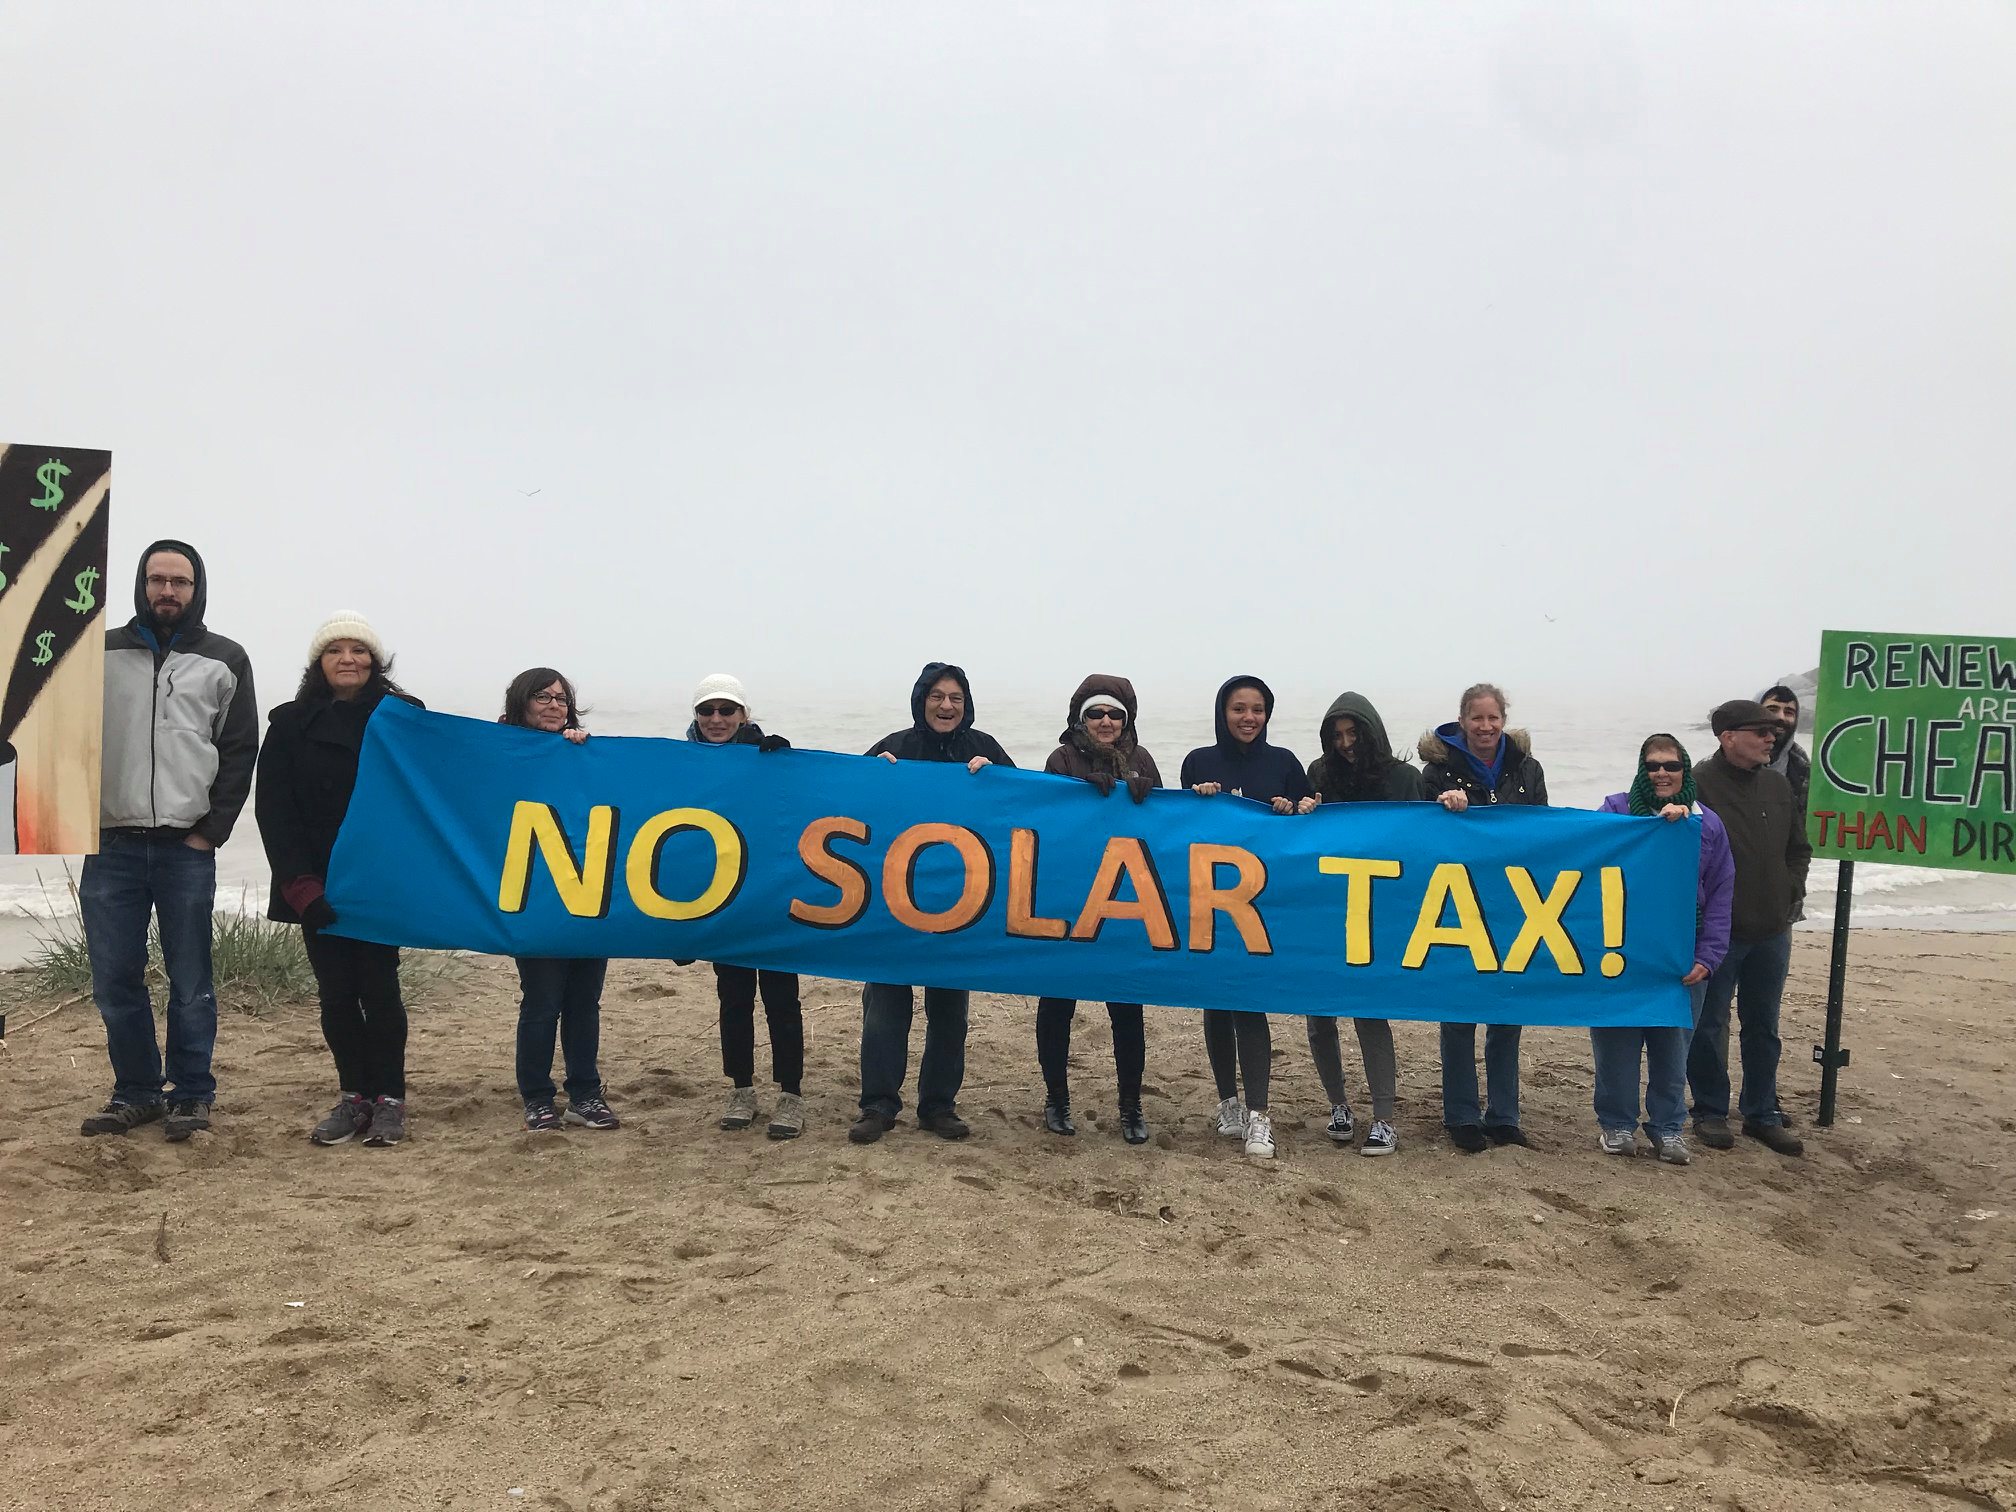 A group protesting at a beach holds a sign that reads "No Solar Tax!"